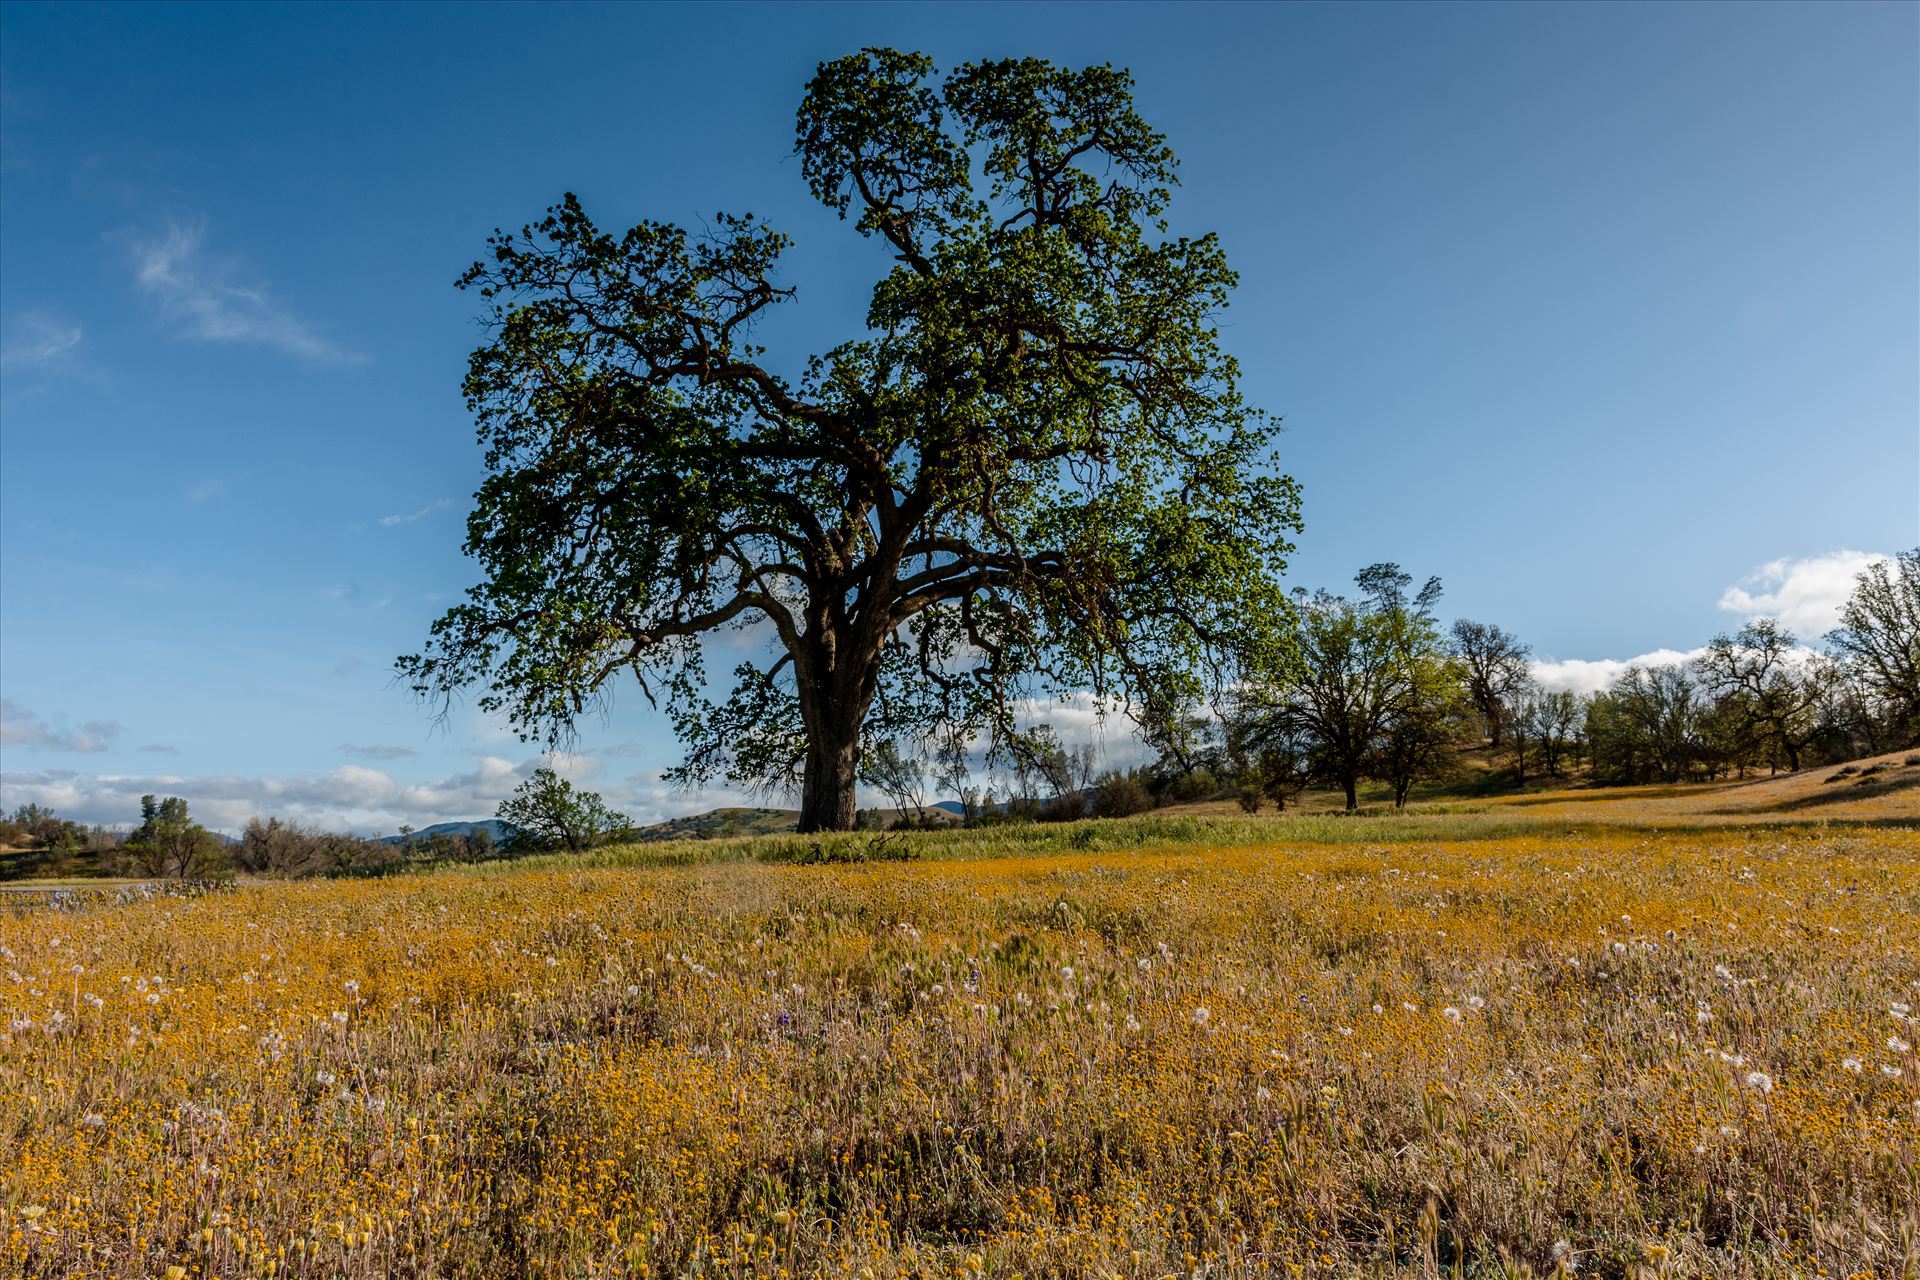 Shell Creek Oak Tree.jpg Golden fields and an Oak in spring in Paso Robles California by Sarah Williams